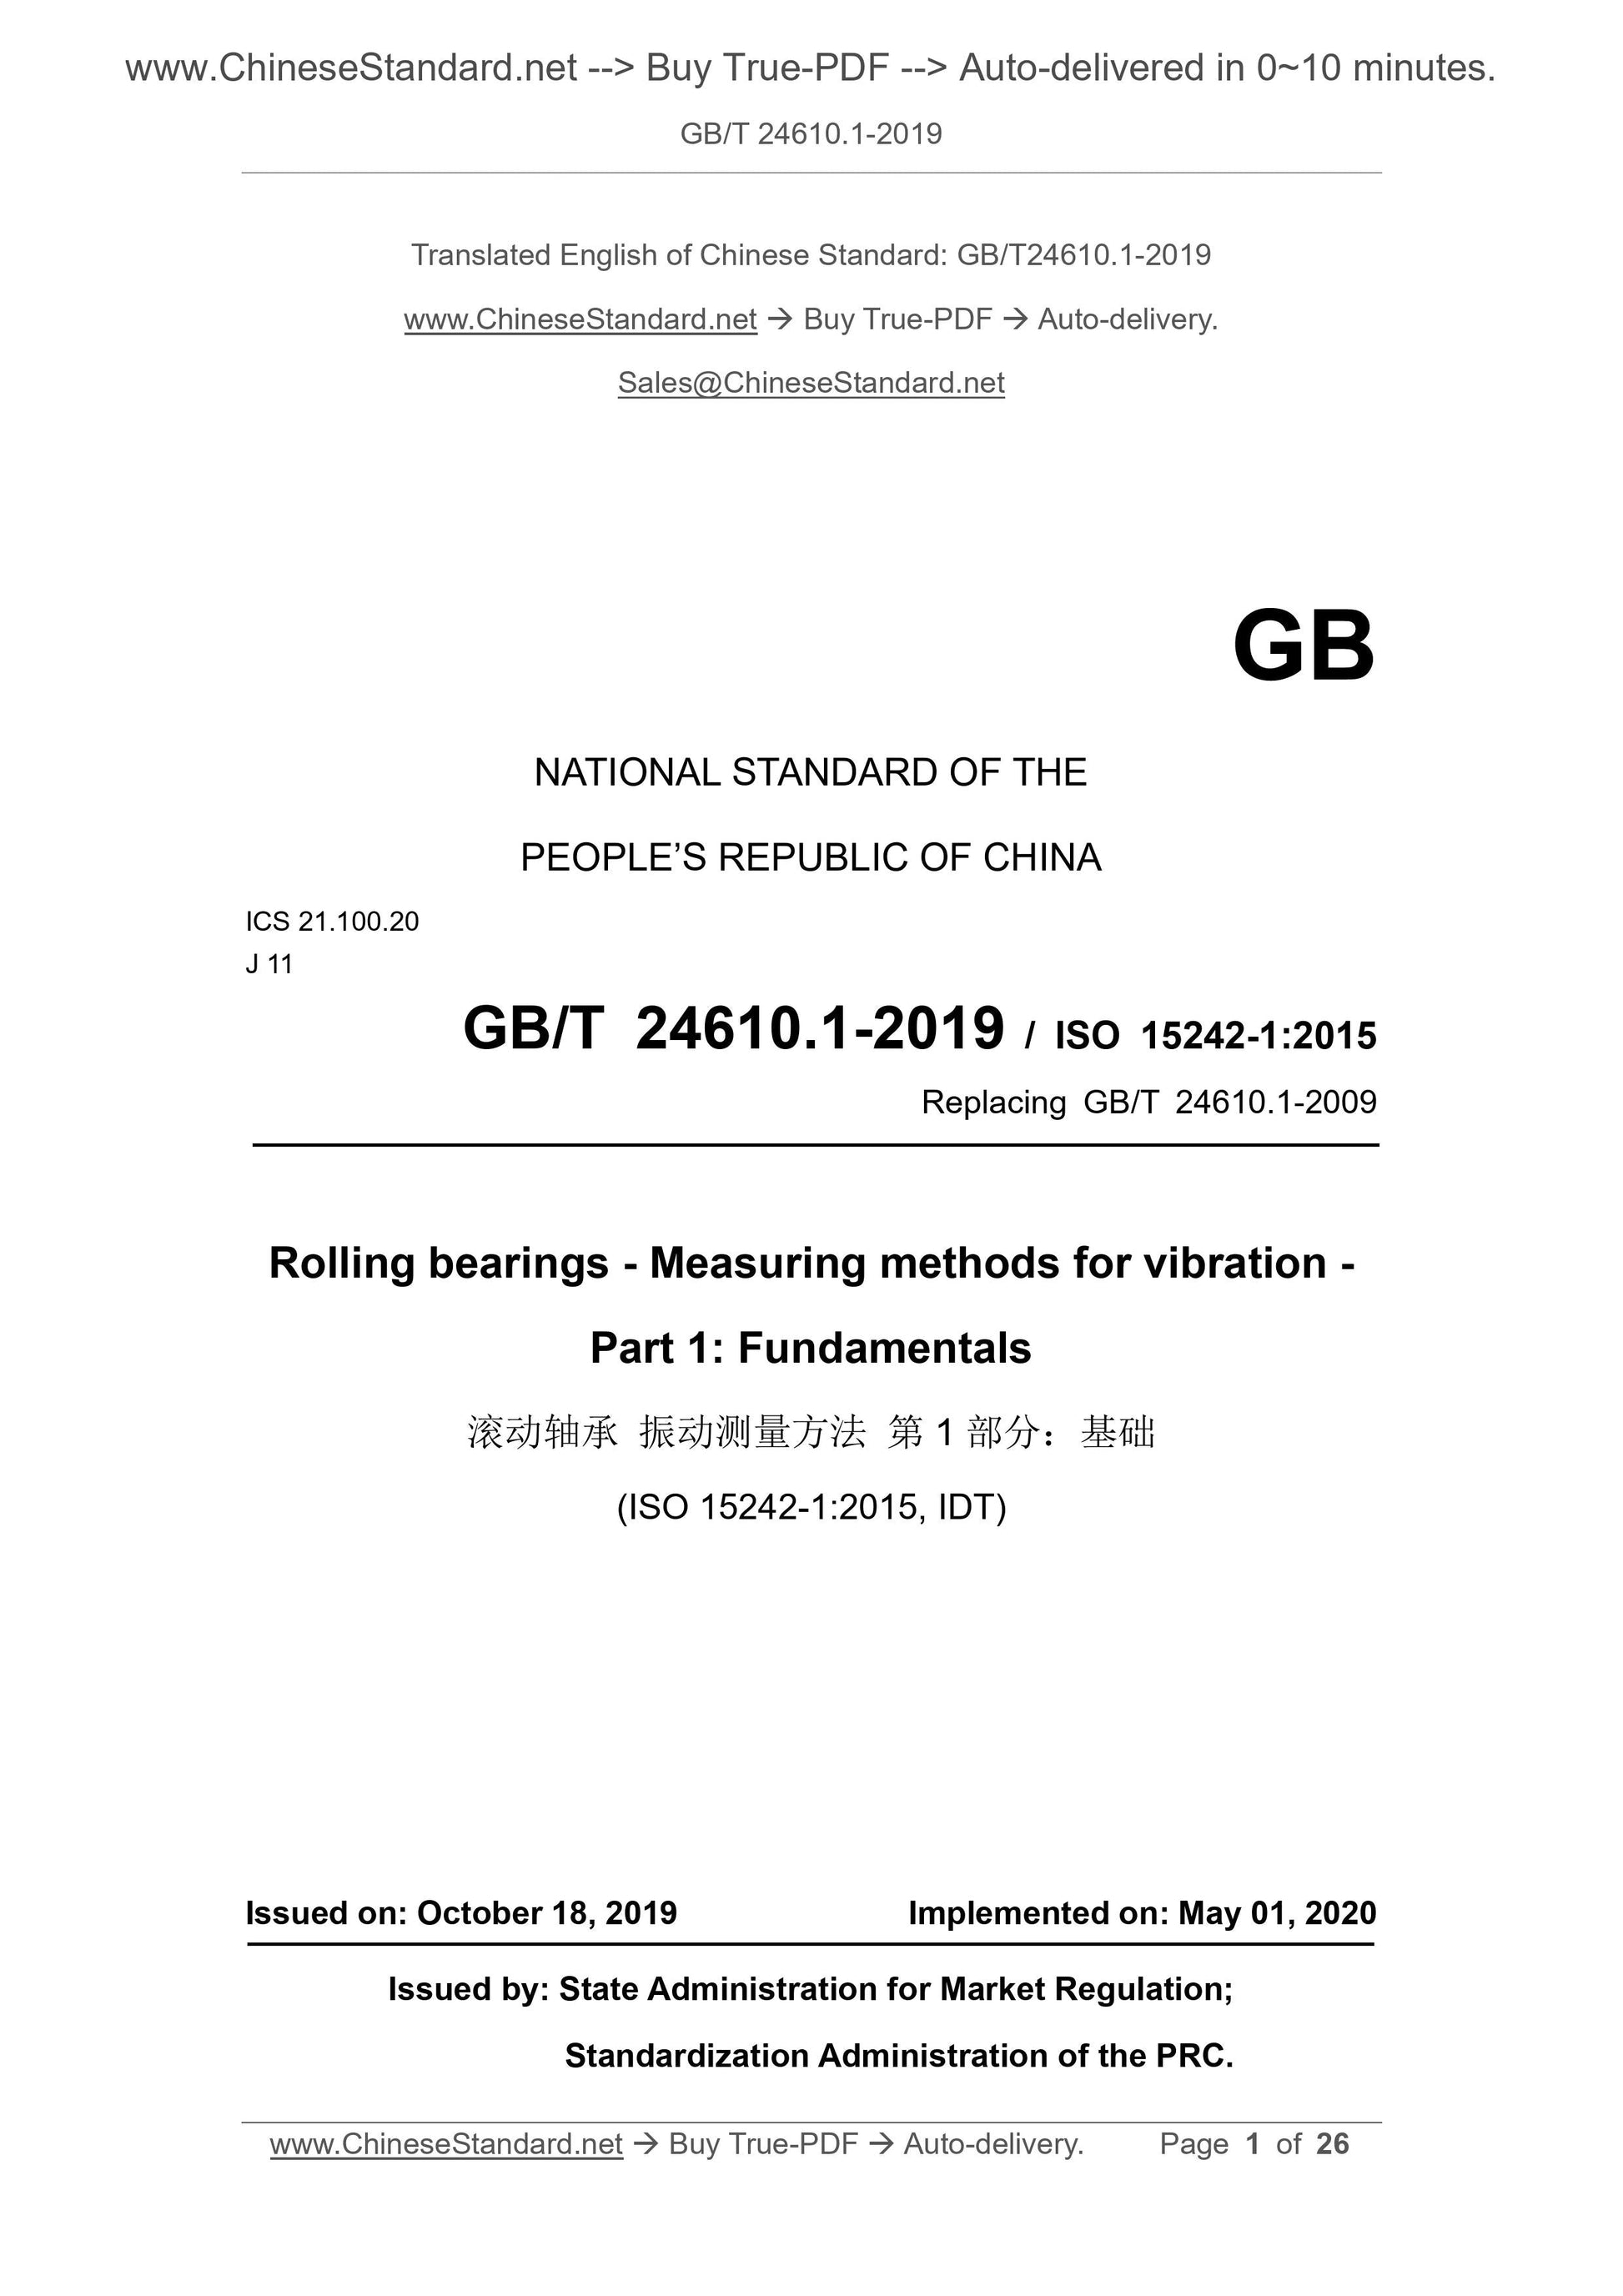 GB/T 24610.1-2019 Page 1